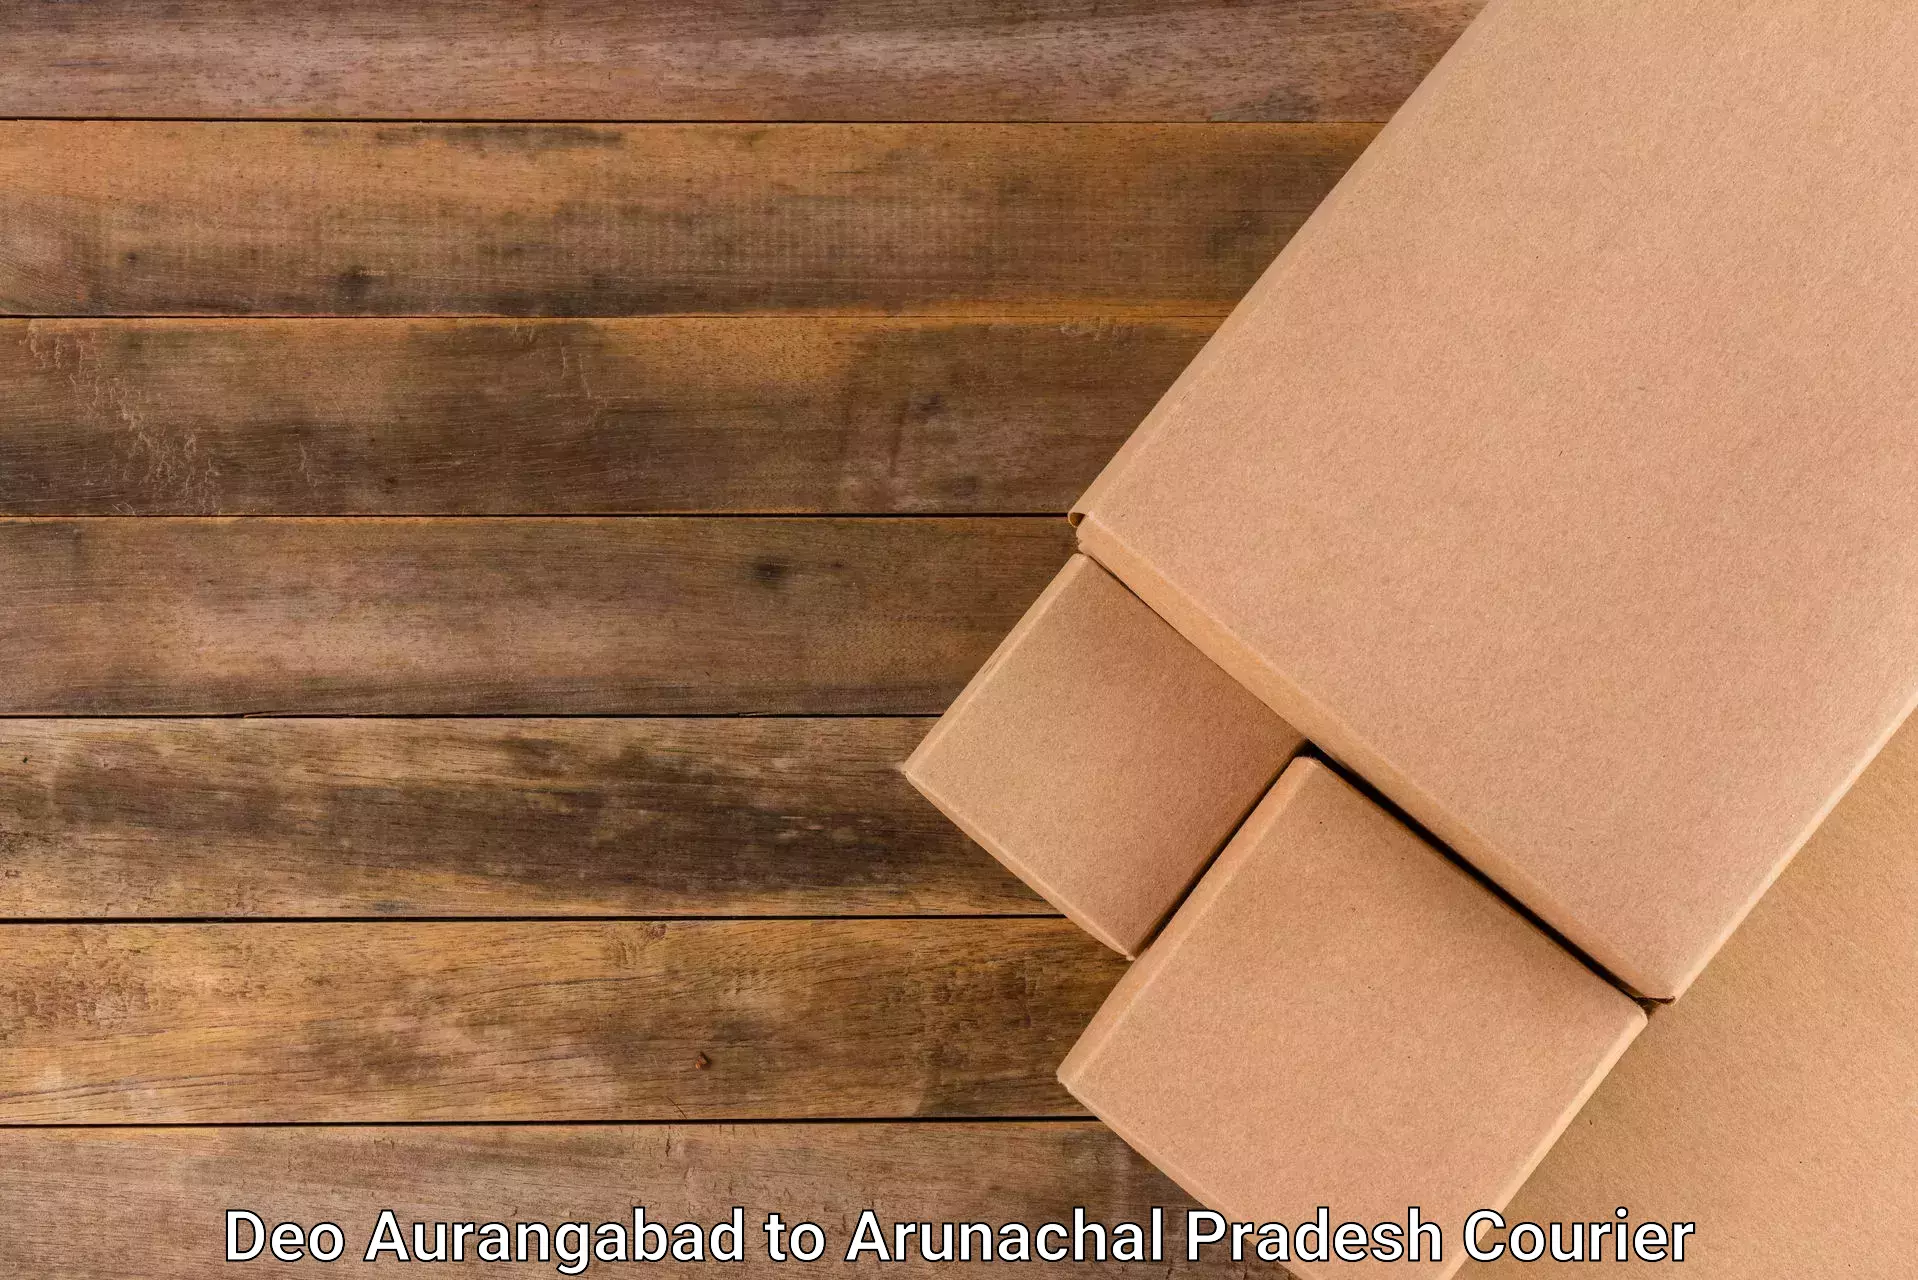 Large package courier Deo Aurangabad to Lohit